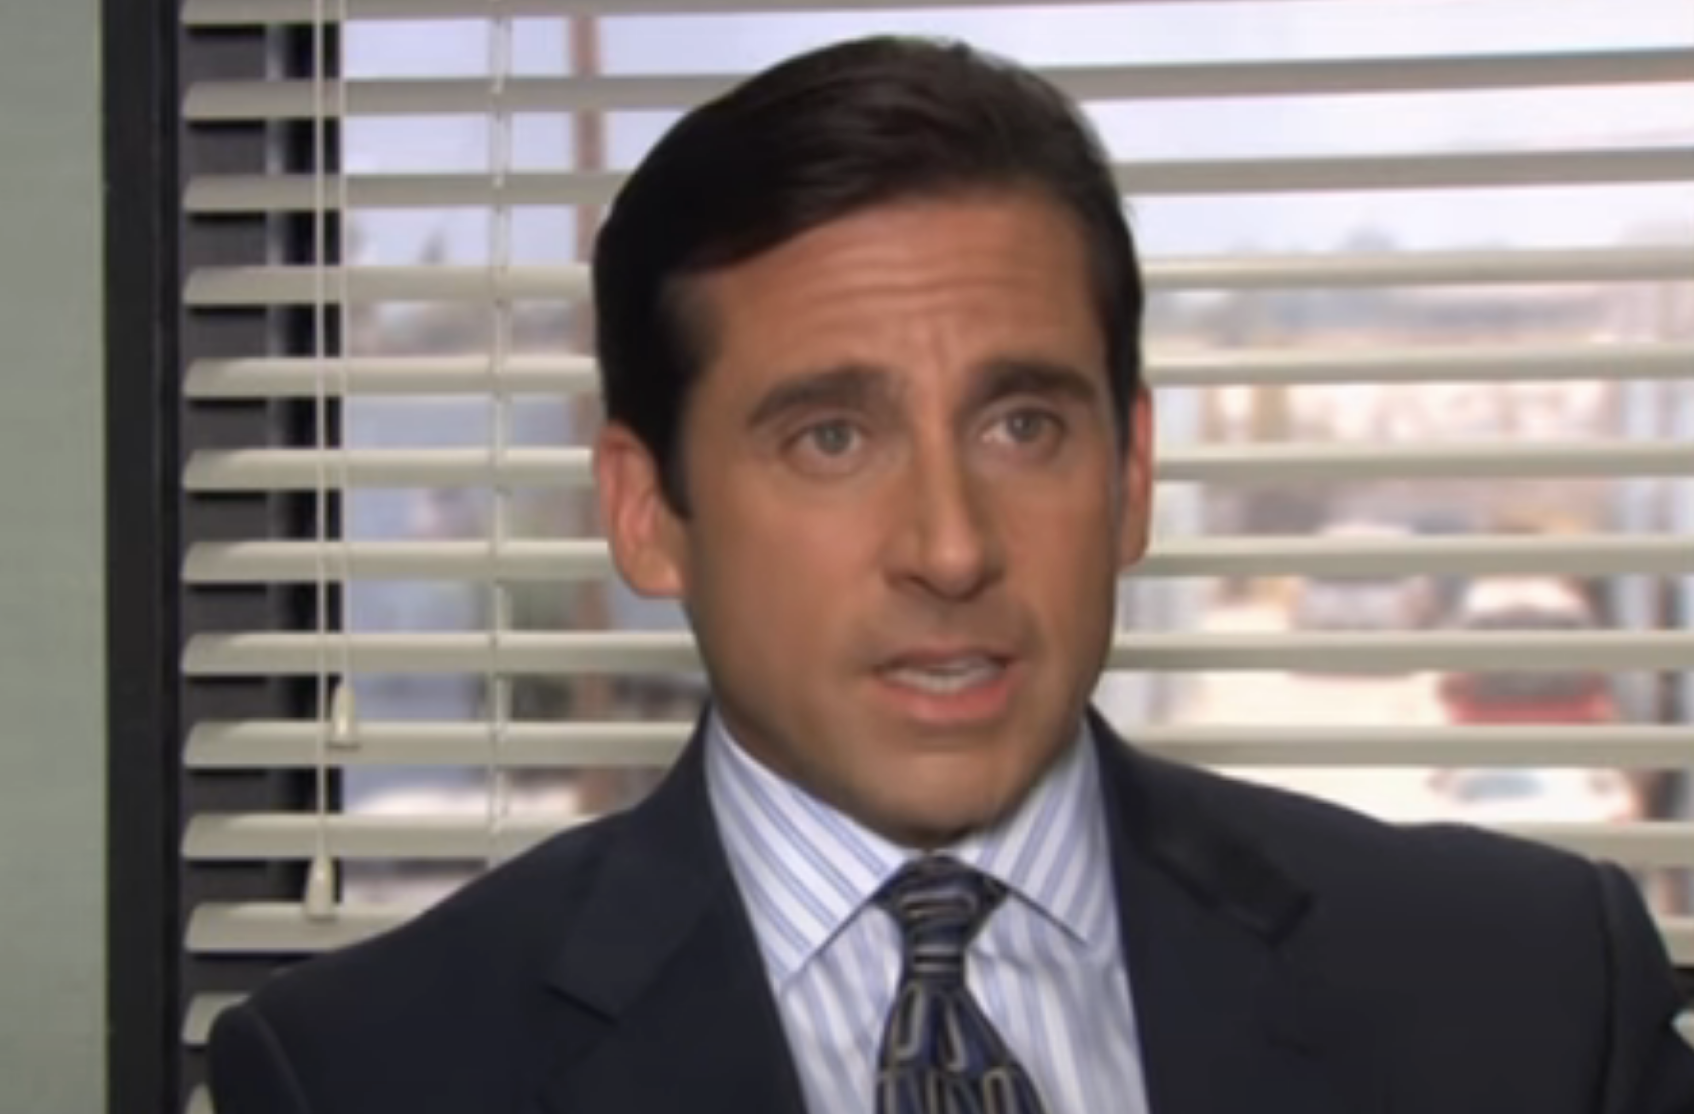 Steve Carell as Michael Scott in &quot;The Office&quot;